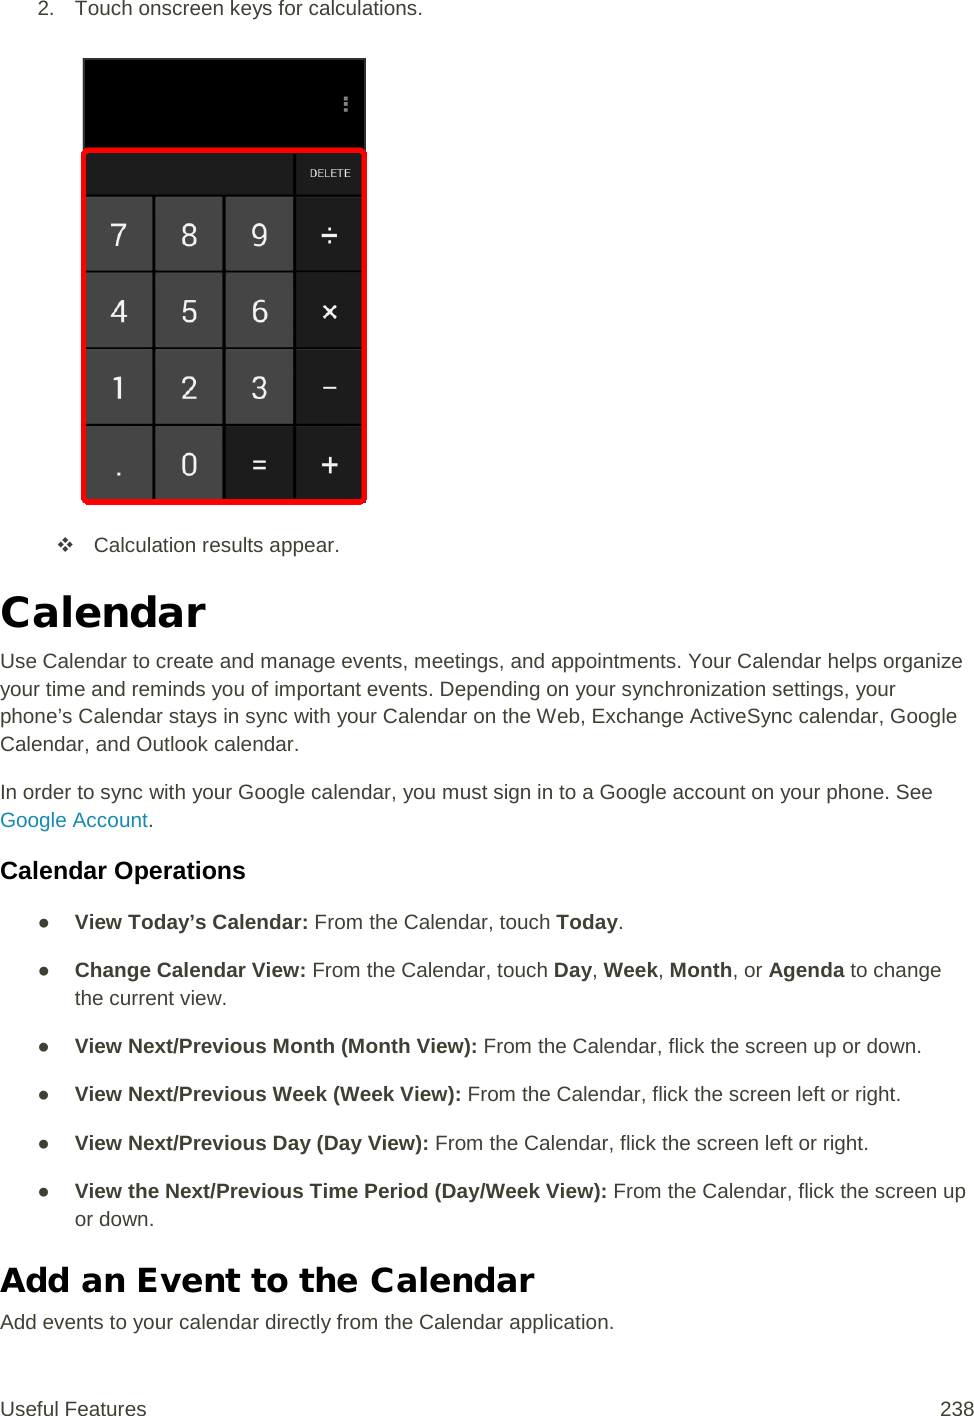 2. Touch onscreen keys for calculations.    Calculation results appear. Calendar Use Calendar to create and manage events, meetings, and appointments. Your Calendar helps organize your time and reminds you of important events. Depending on your synchronization settings, your phone’s Calendar stays in sync with your Calendar on the Web, Exchange ActiveSync calendar, Google Calendar, and Outlook calendar. In order to sync with your Google calendar, you must sign in to a Google account on your phone. See Google Account. Calendar Operations ● View Today’s Calendar: From the Calendar, touch Today. ● Change Calendar View: From the Calendar, touch Day, Week, Month, or Agenda to change the current view. ● View Next/Previous Month (Month View): From the Calendar, flick the screen up or down. ● View Next/Previous Week (Week View): From the Calendar, flick the screen left or right. ● View Next/Previous Day (Day View): From the Calendar, flick the screen left or right. ● View the Next/Previous Time Period (Day/Week View): From the Calendar, flick the screen up or down. Add an Event to the Calendar Add events to your calendar directly from the Calendar application. Useful Features 238   